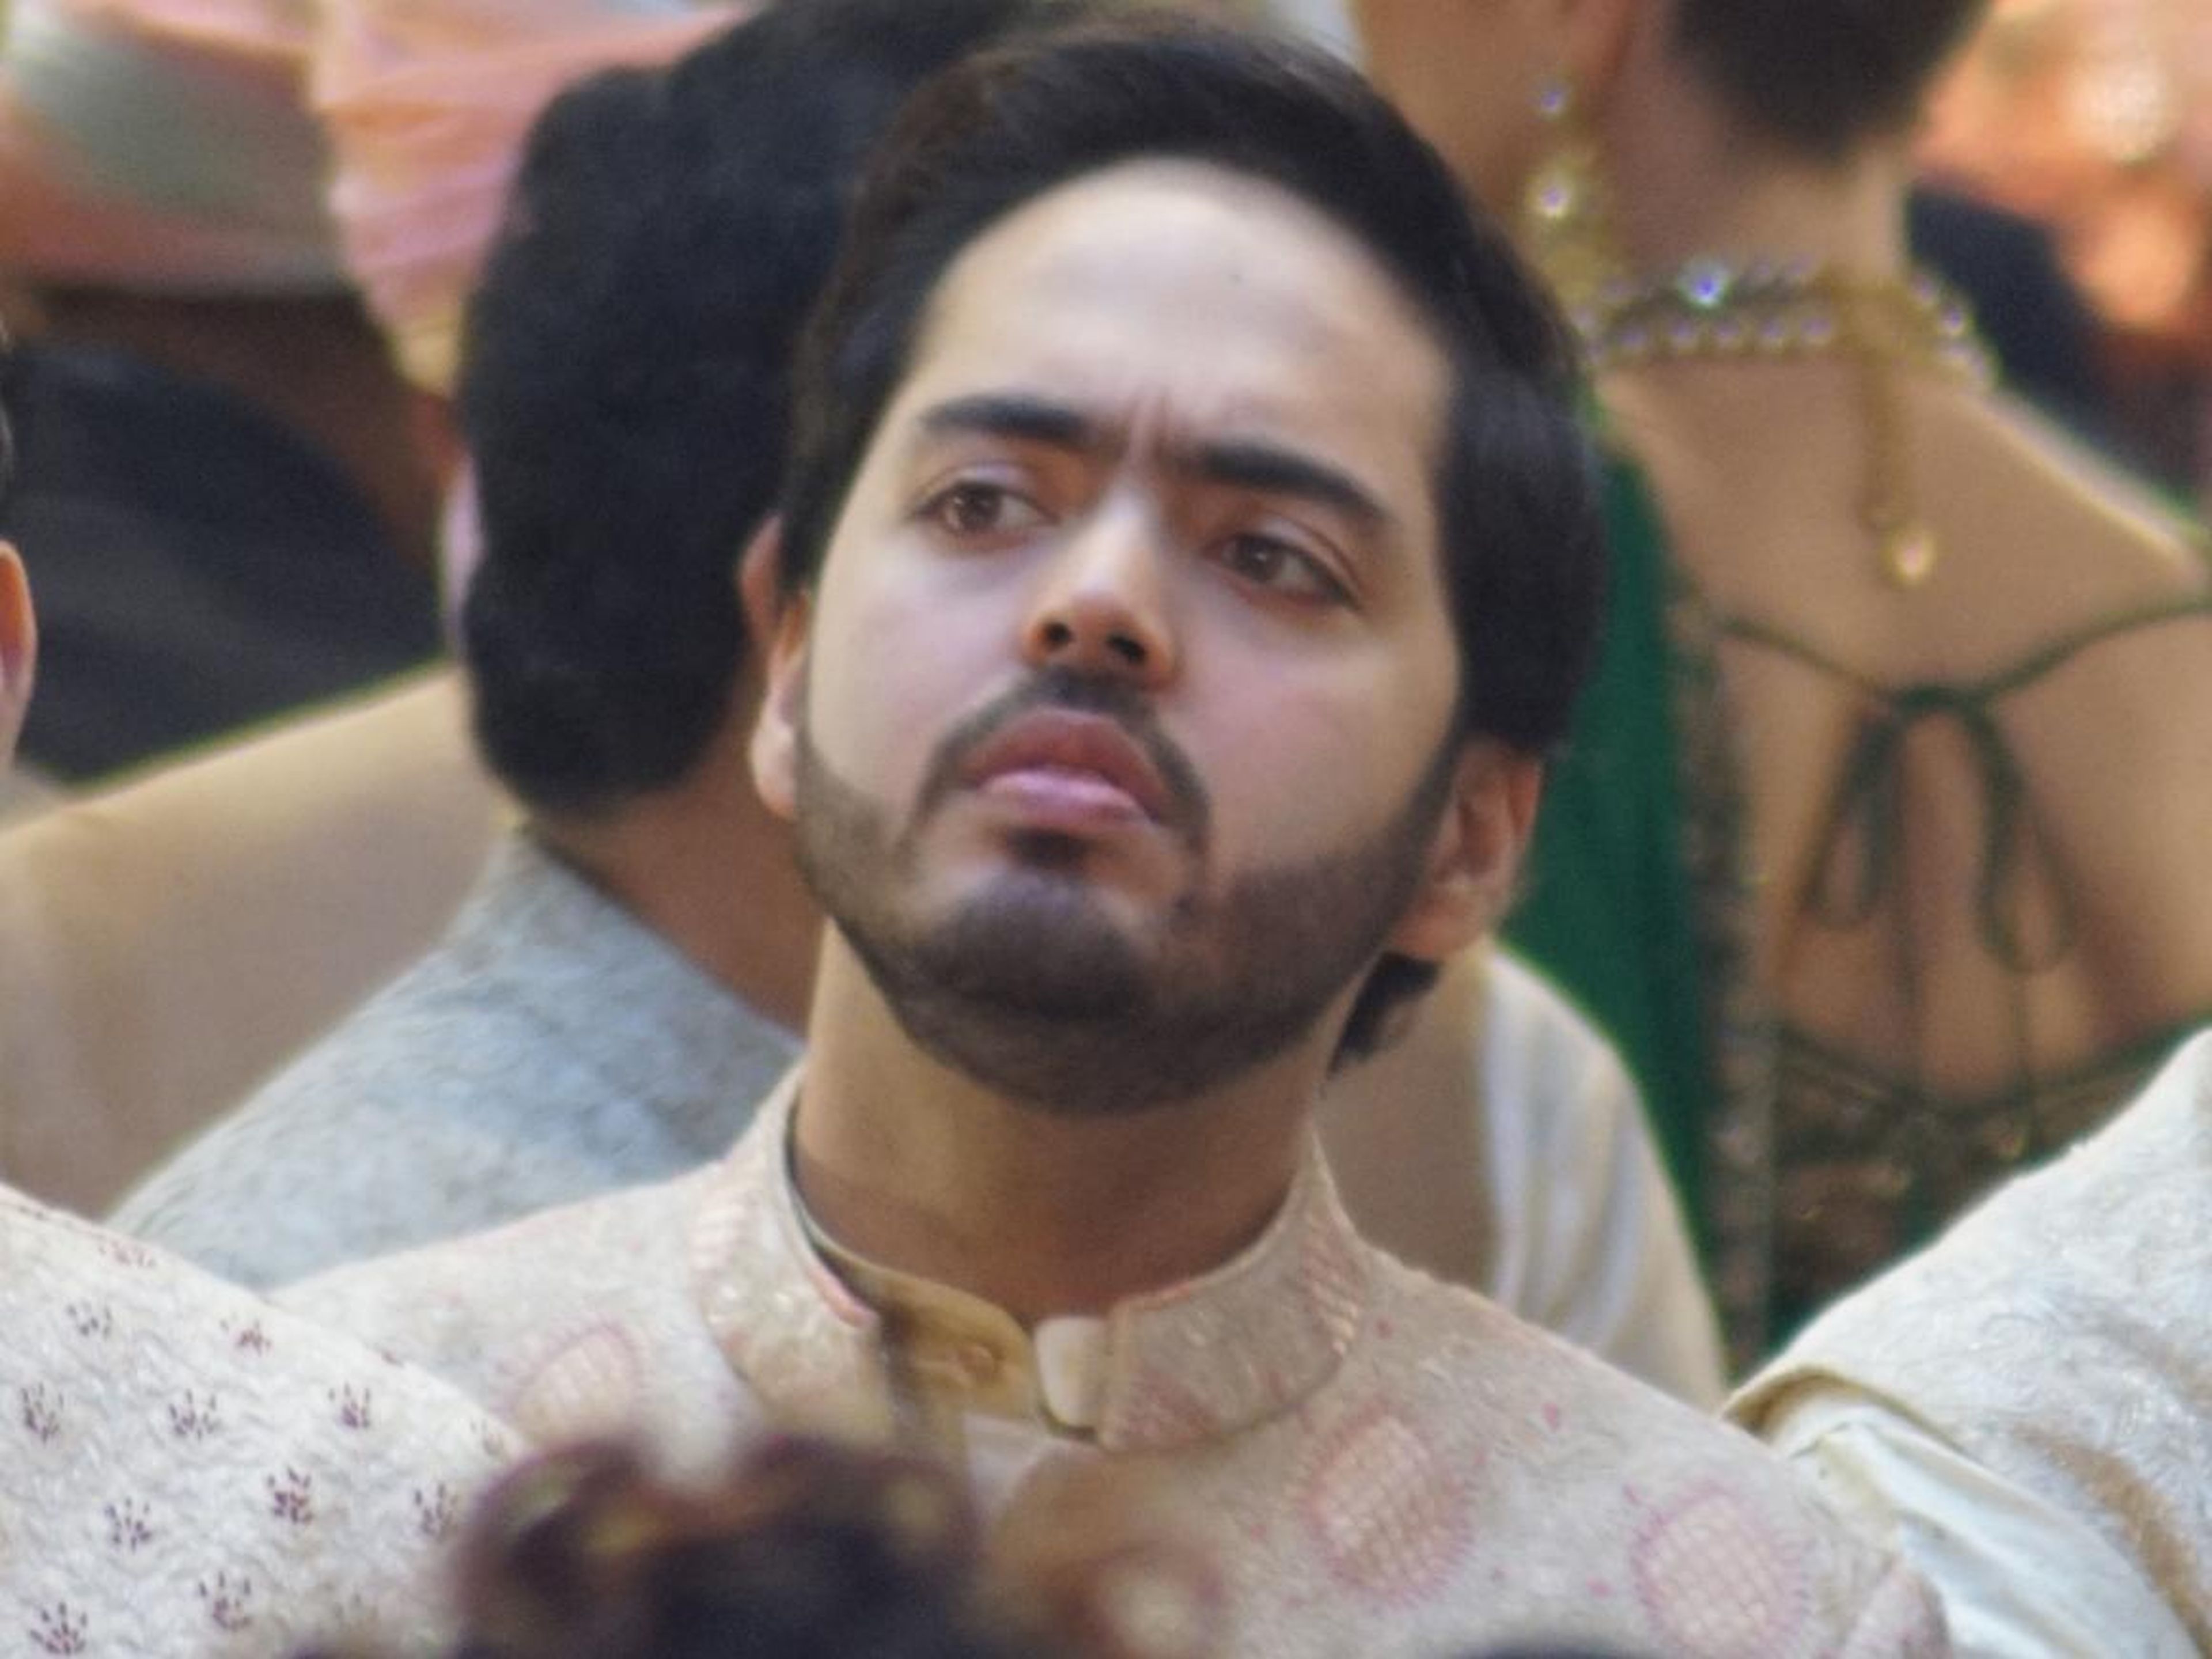 Rumors have swirled about a possible engagement between Anant and Radhika Merchant, but a Reliance spokesperson said in May that "Anant Ambani is not engaged yet." A recent article called Anant "India’s most eligible bachelor."